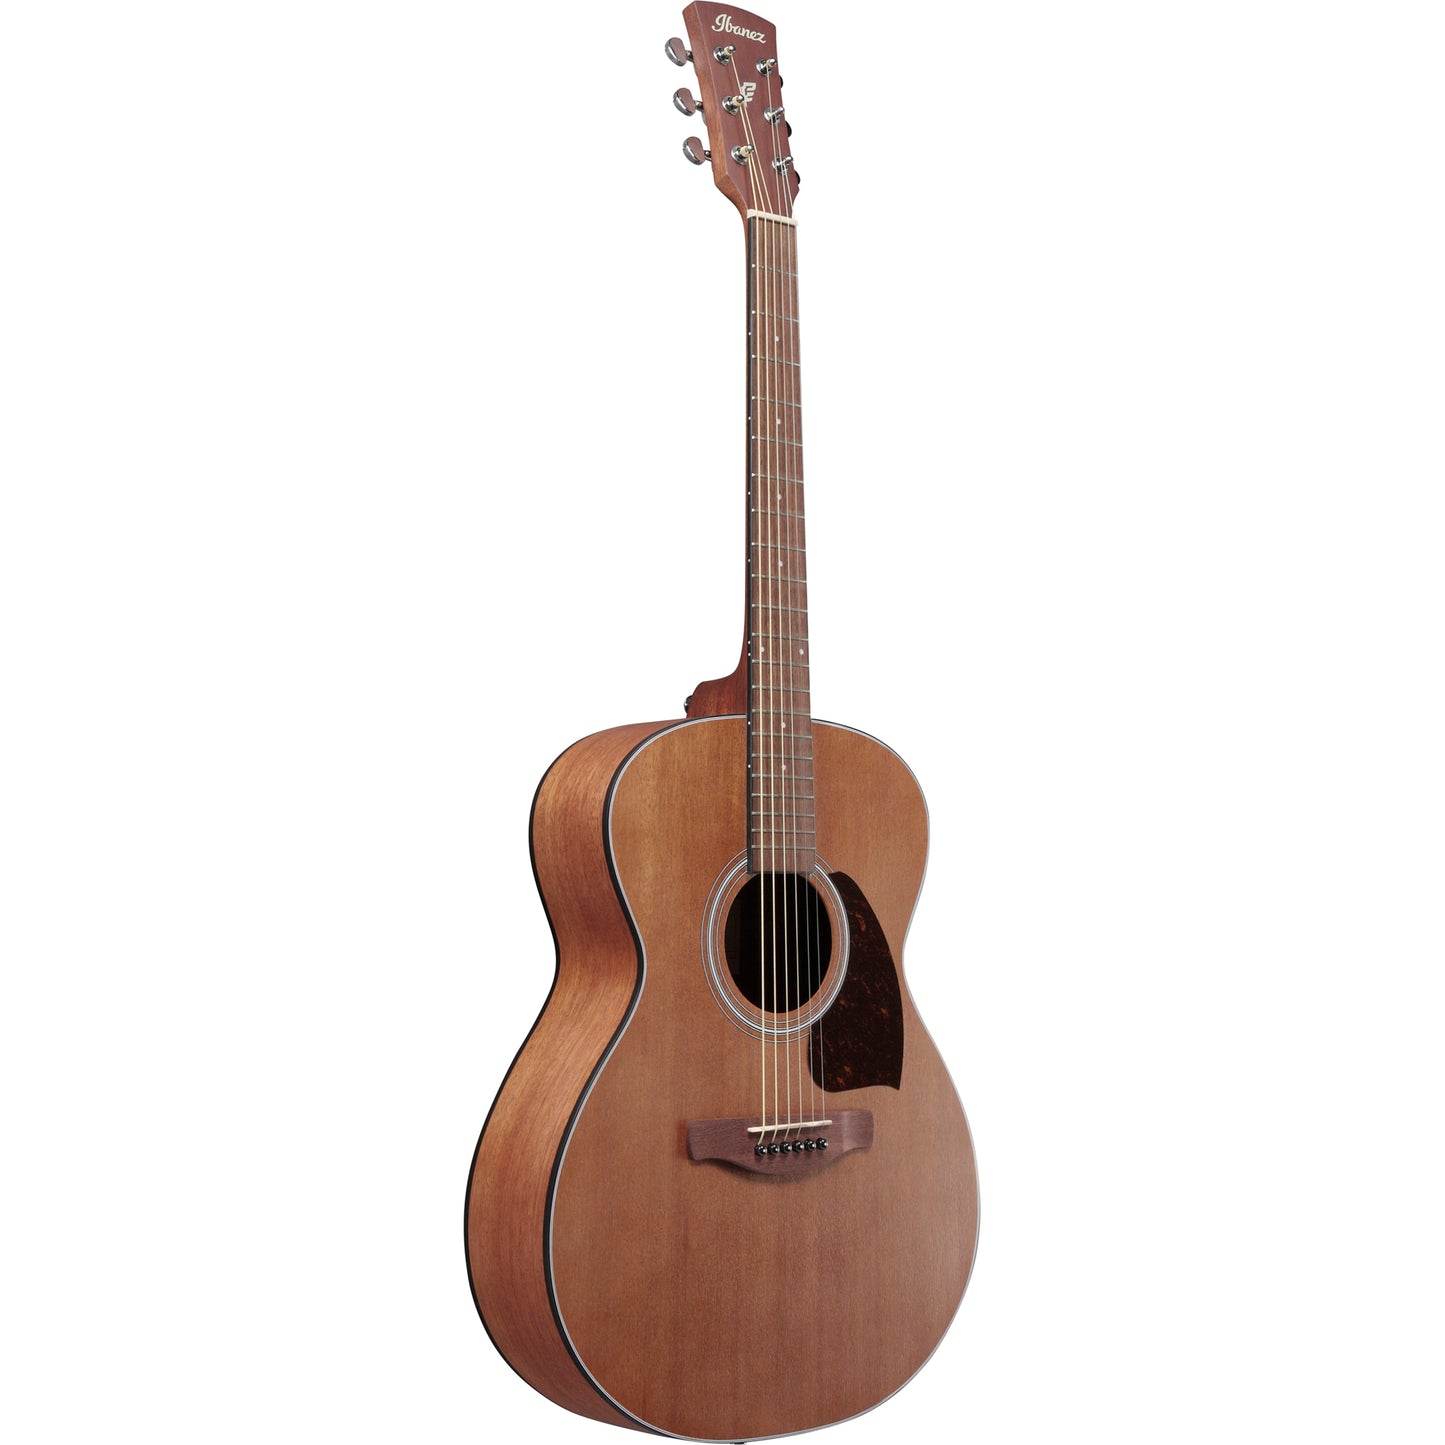 Ibanez PC54 6 String Acoustic Guitar - Open Pore Natural